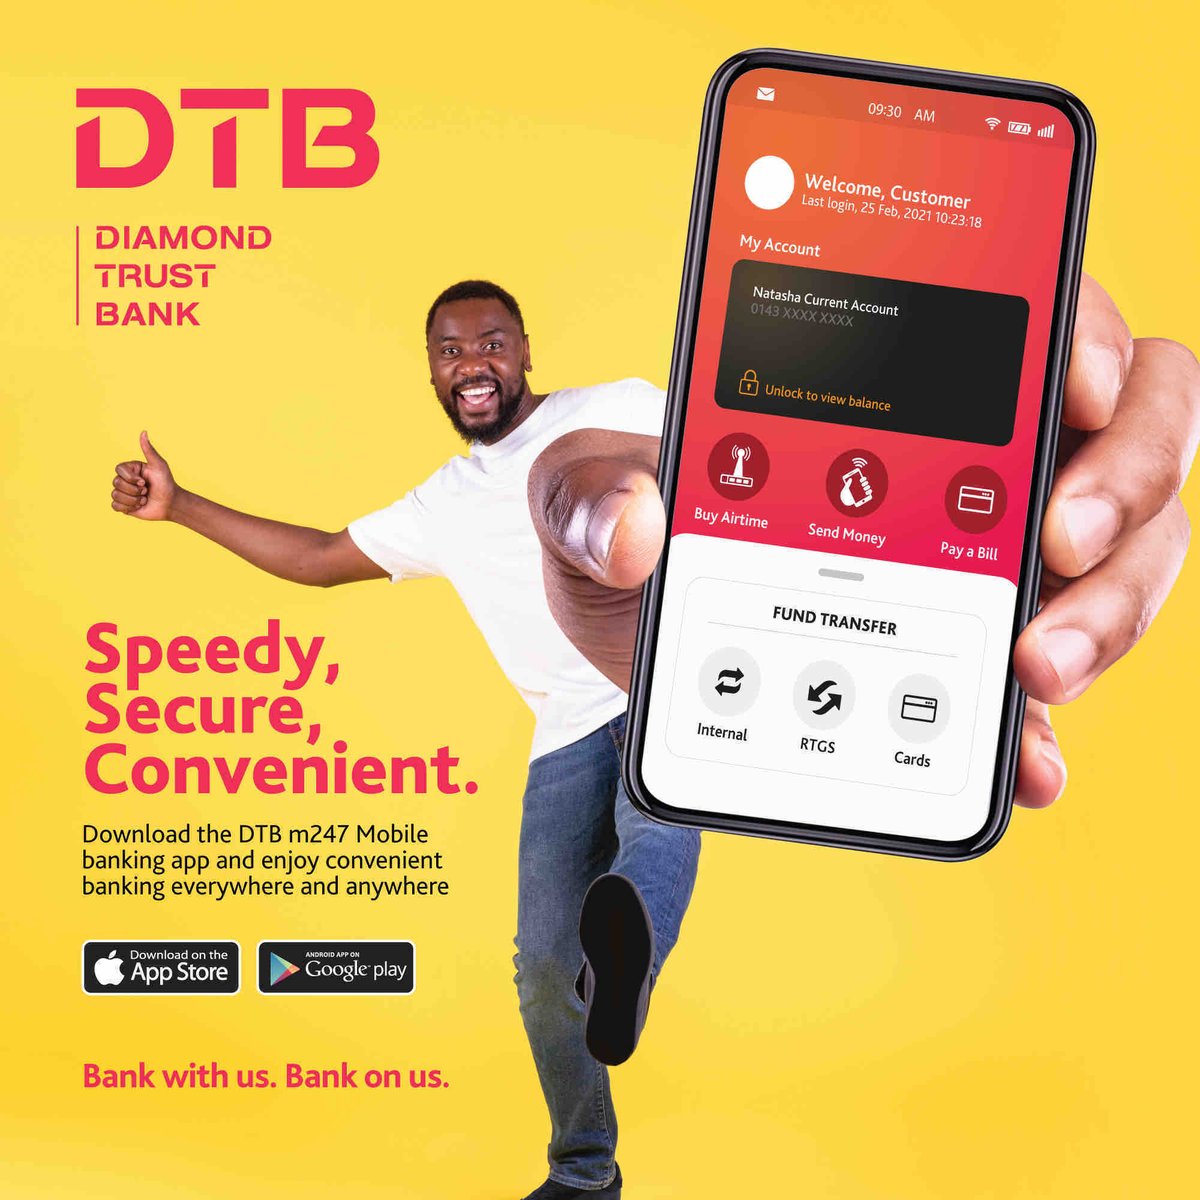 Your mobile phone can be used for more than WhatsApping or making calls. Send / receive money, check account balance, pay bills and monitor your account with DTBm24/7 mobile banking. #BankWithUsBankOnUs